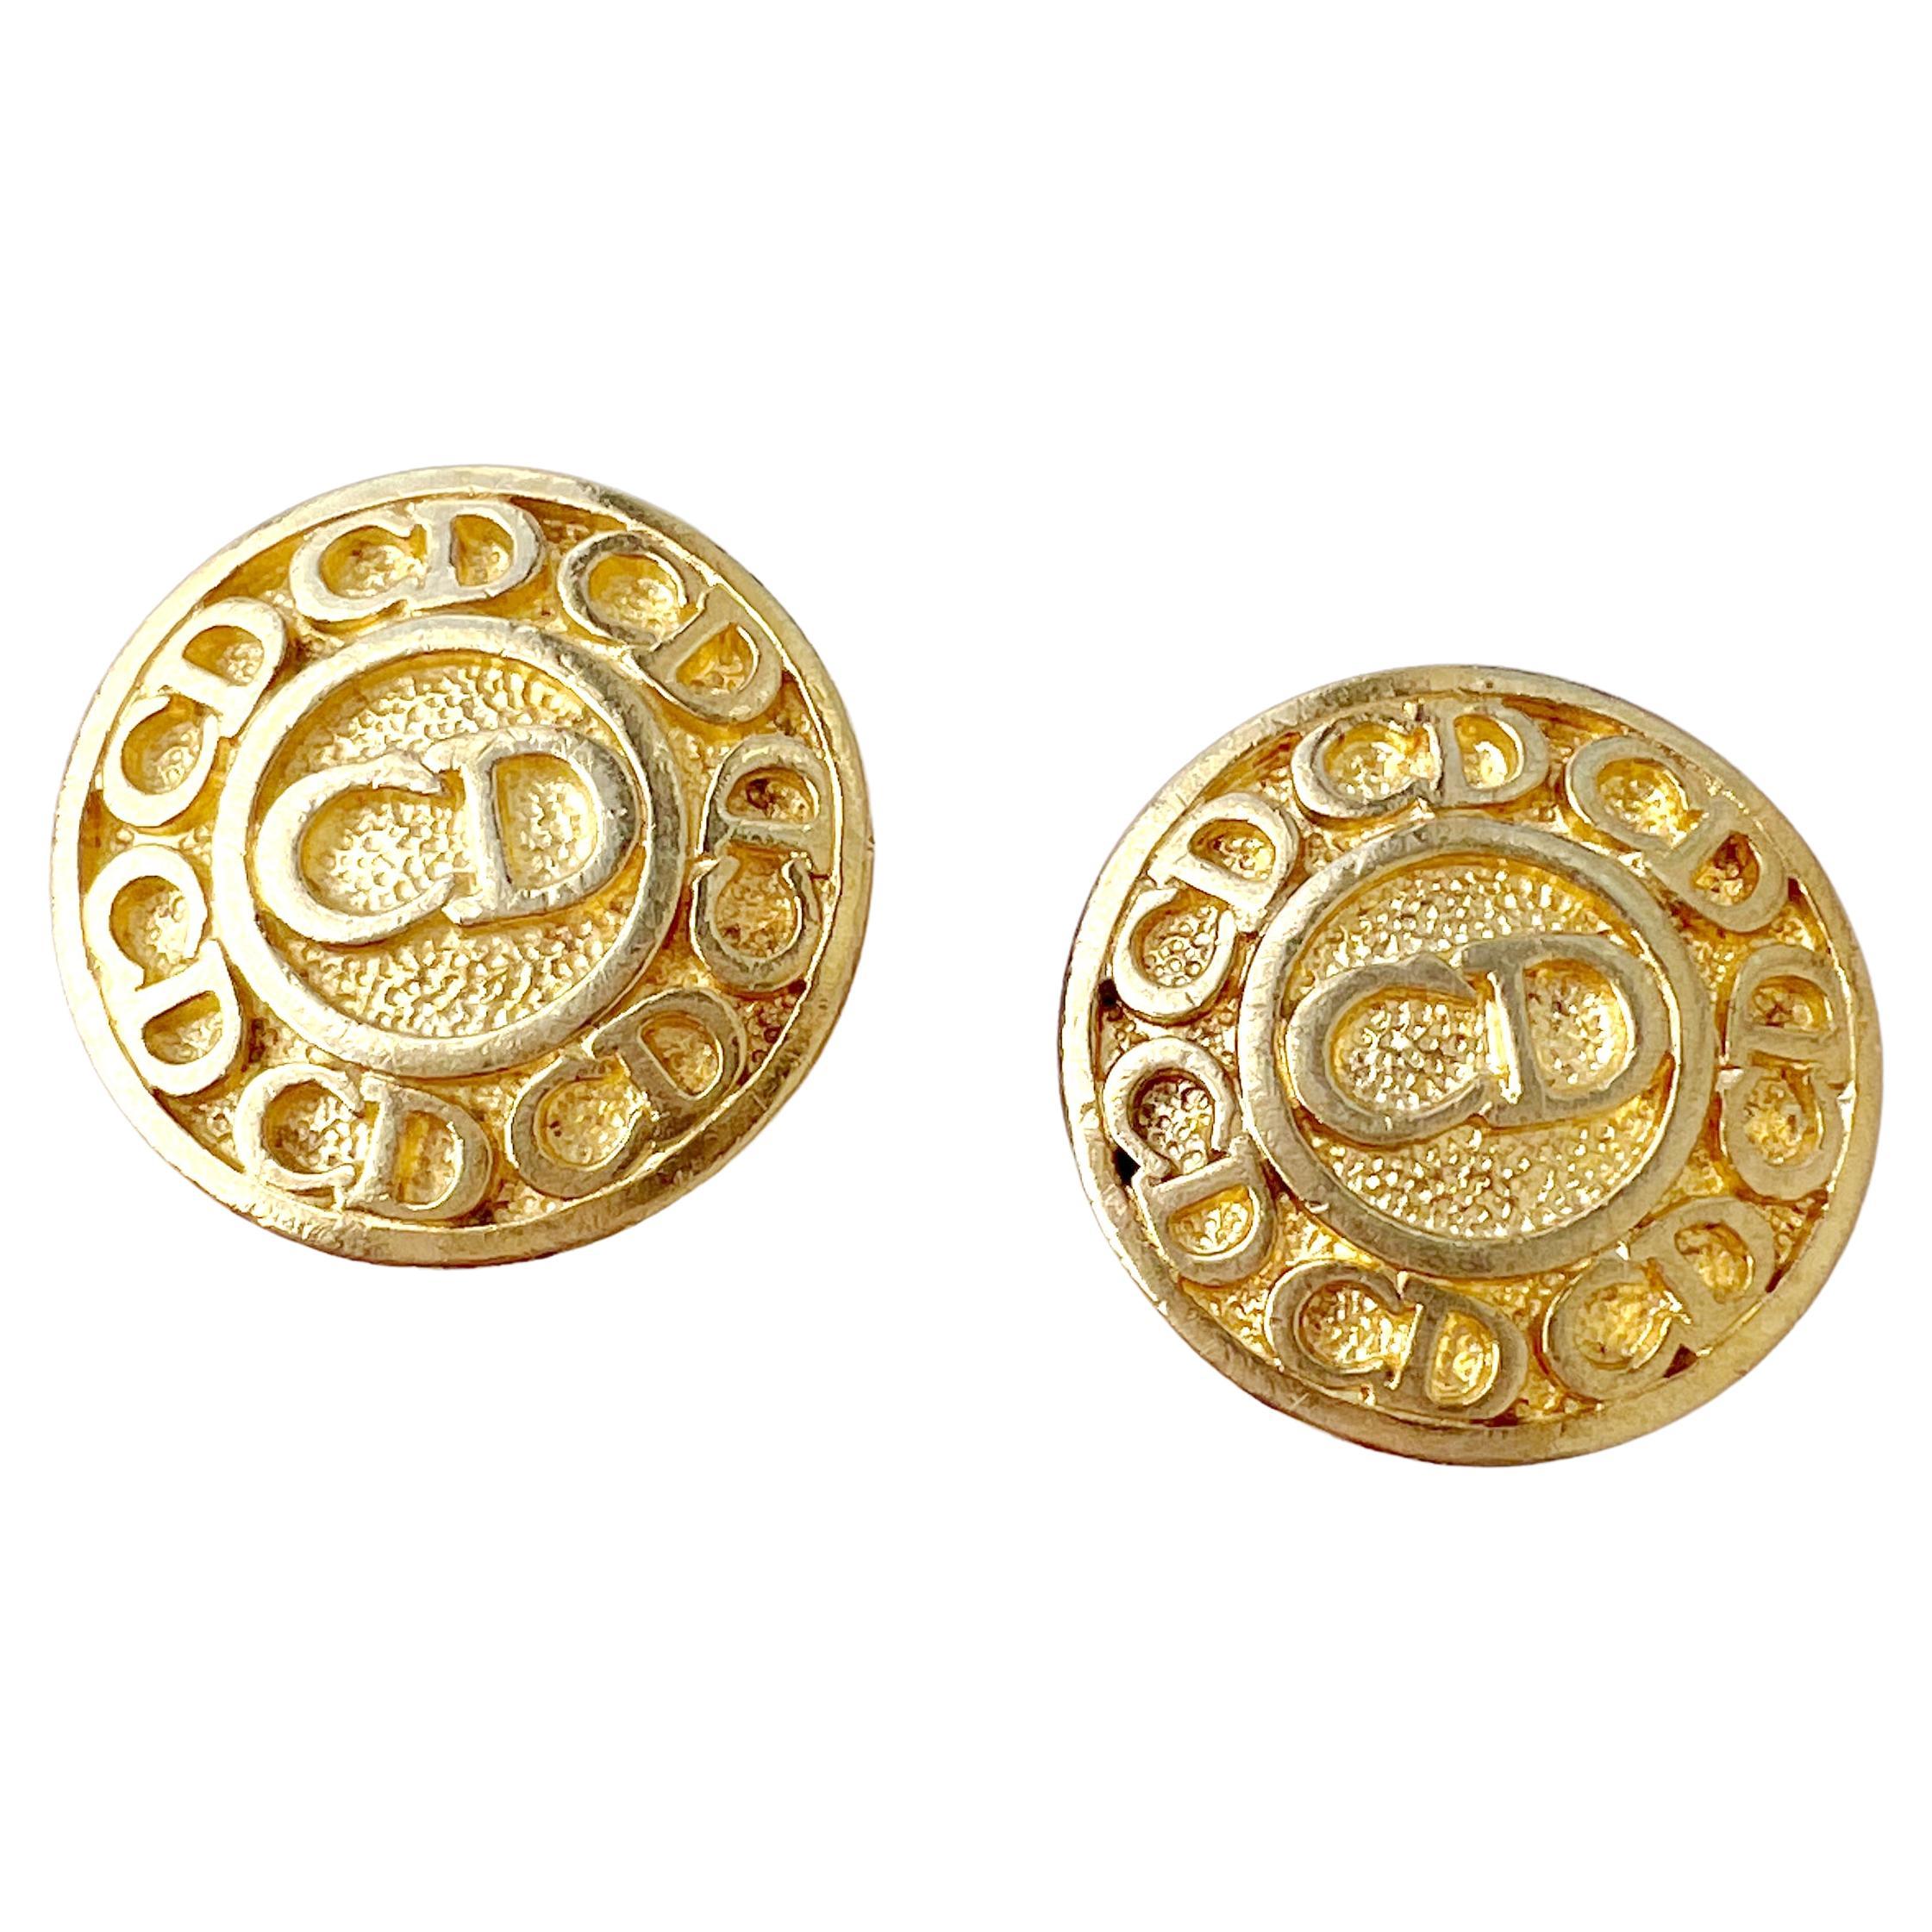 Vintage 1990s Christian Dior logomania-style medallion earrings in gold plate.  These heritage clip on earrings feature the Dior signature repeated CD logo in high shine over a textured background.   The earrings measure just under an inch in